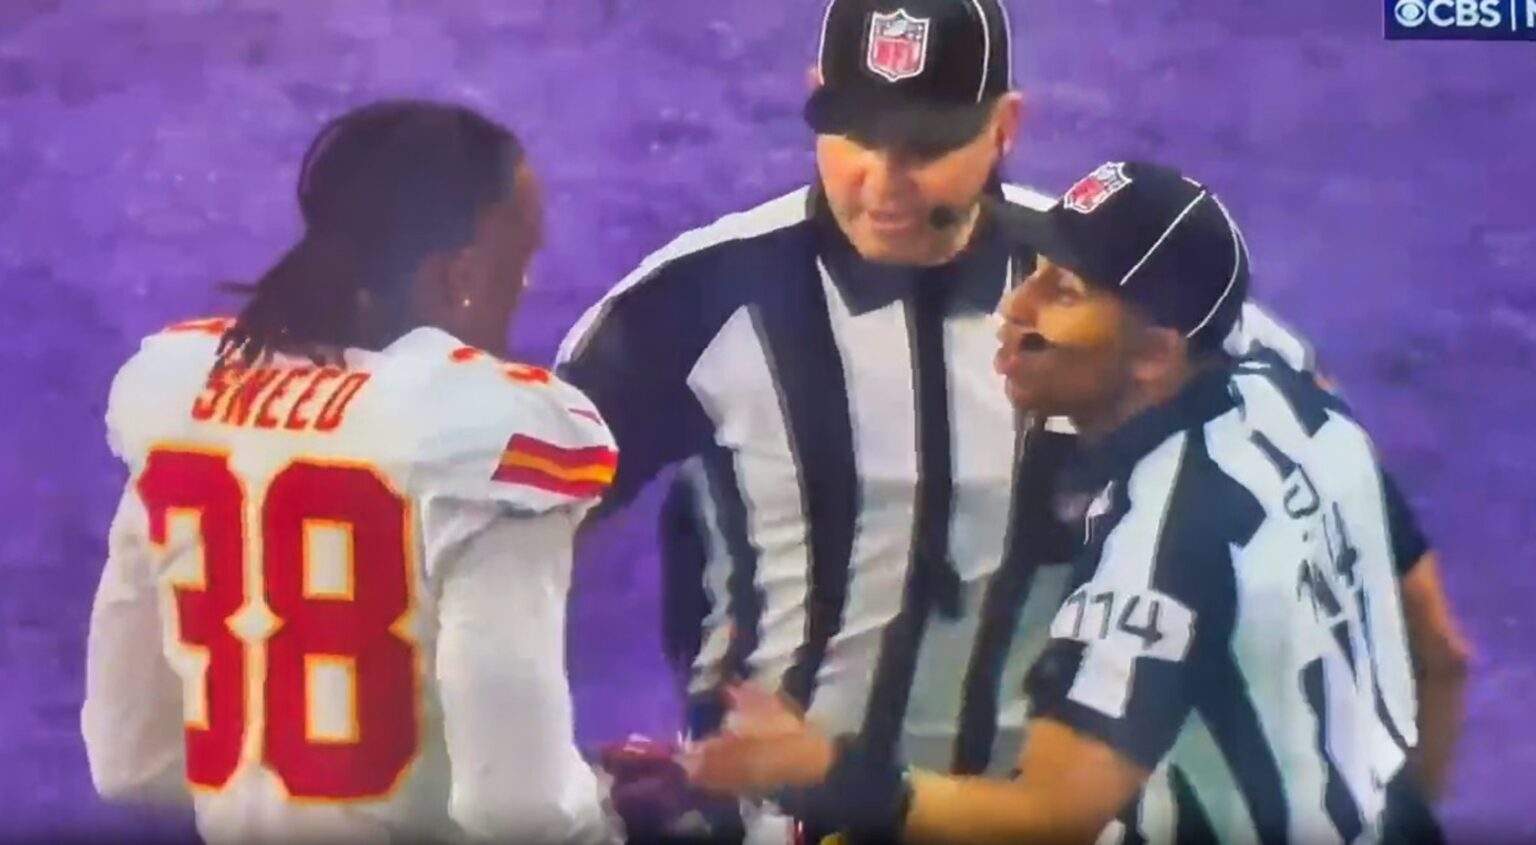 Camera Captures an Official Telling a Chiefs Player to Put His Helmet Back on Rather Than Throw the Flag (VIDEO)